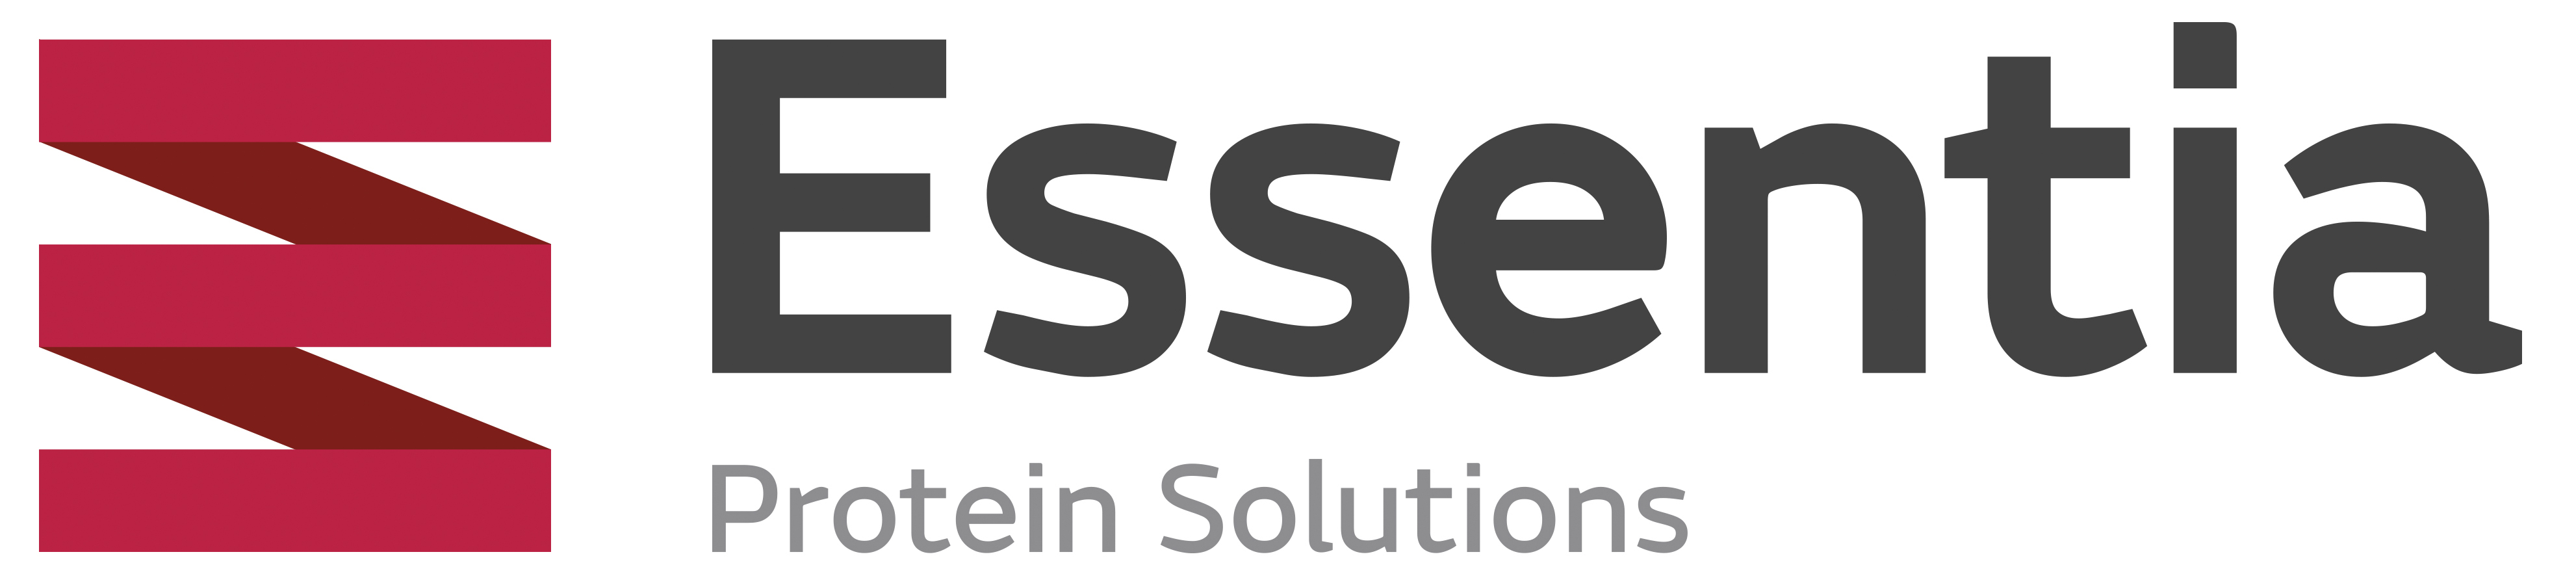 Essentia Protein Solutions (BHJ A/S)